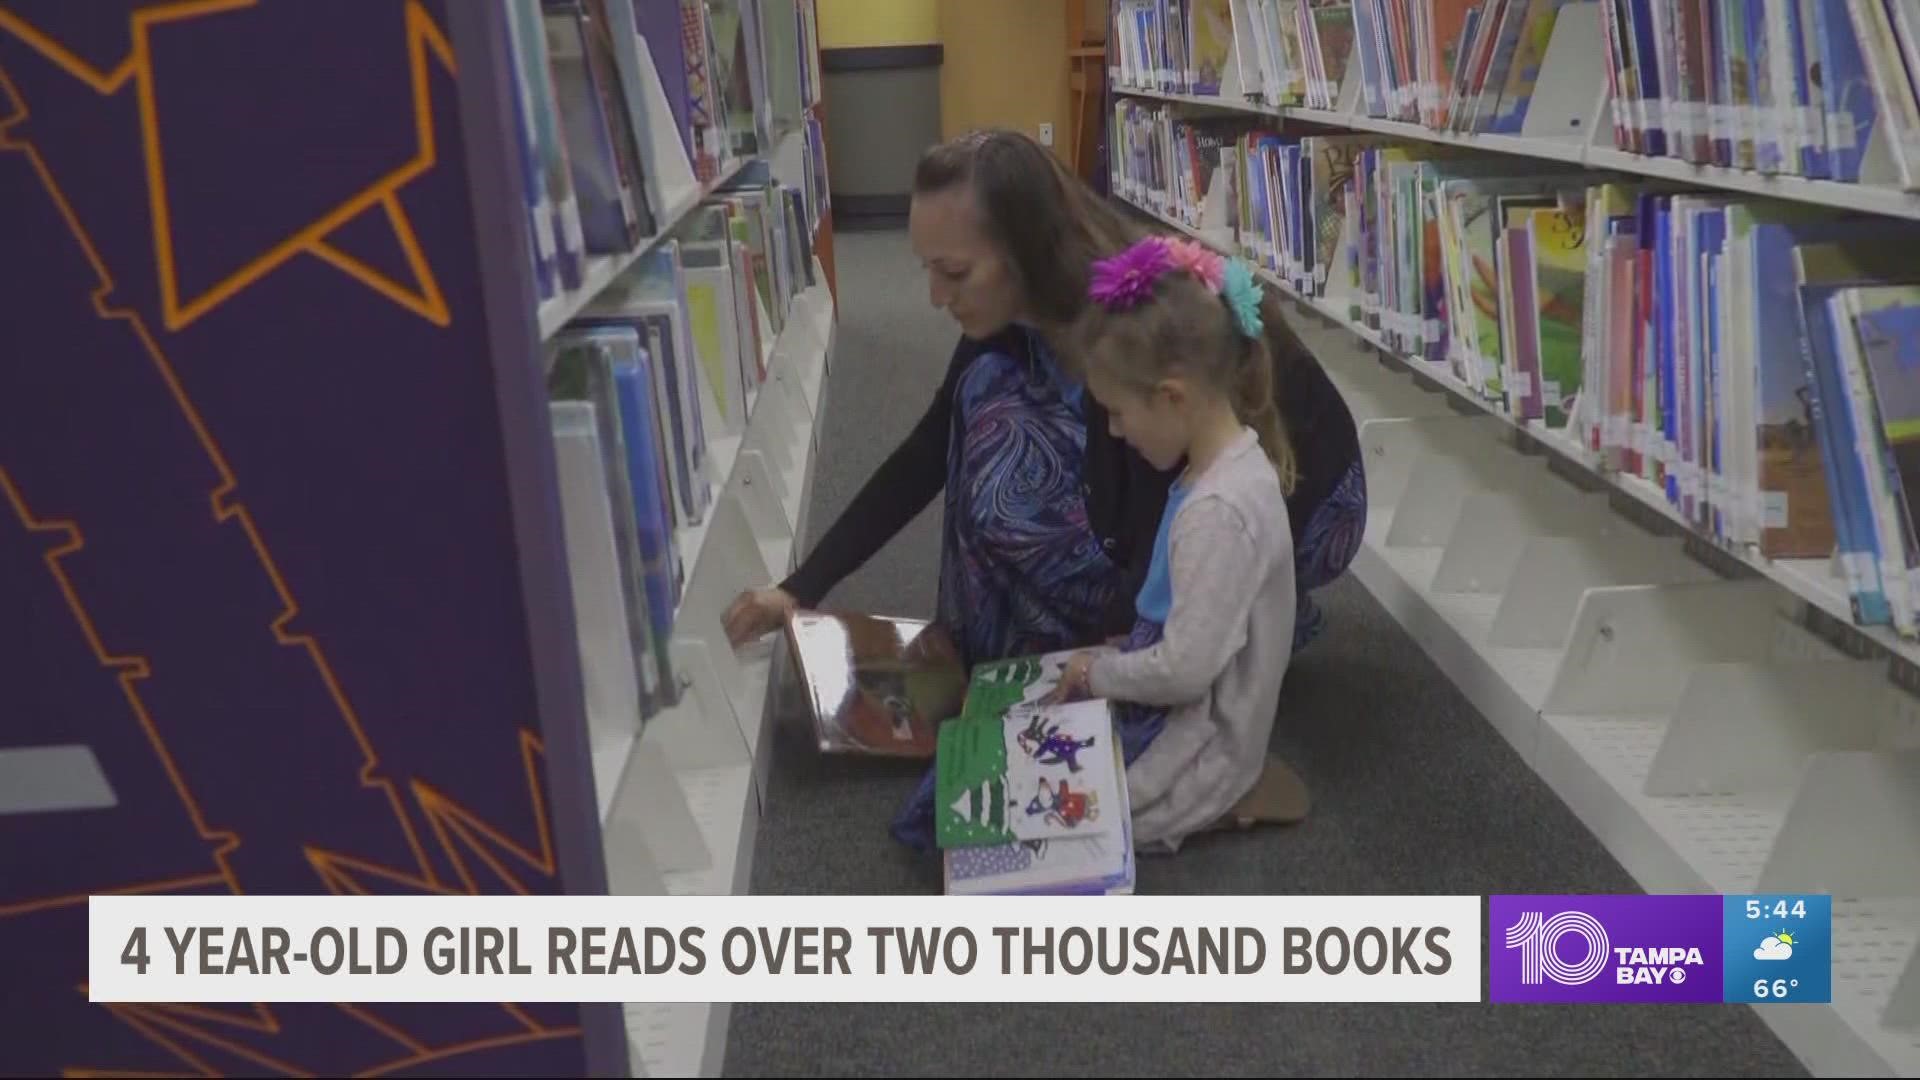 She is not done she says. She has a goal to read more than 3,000 books before the end of 2022.